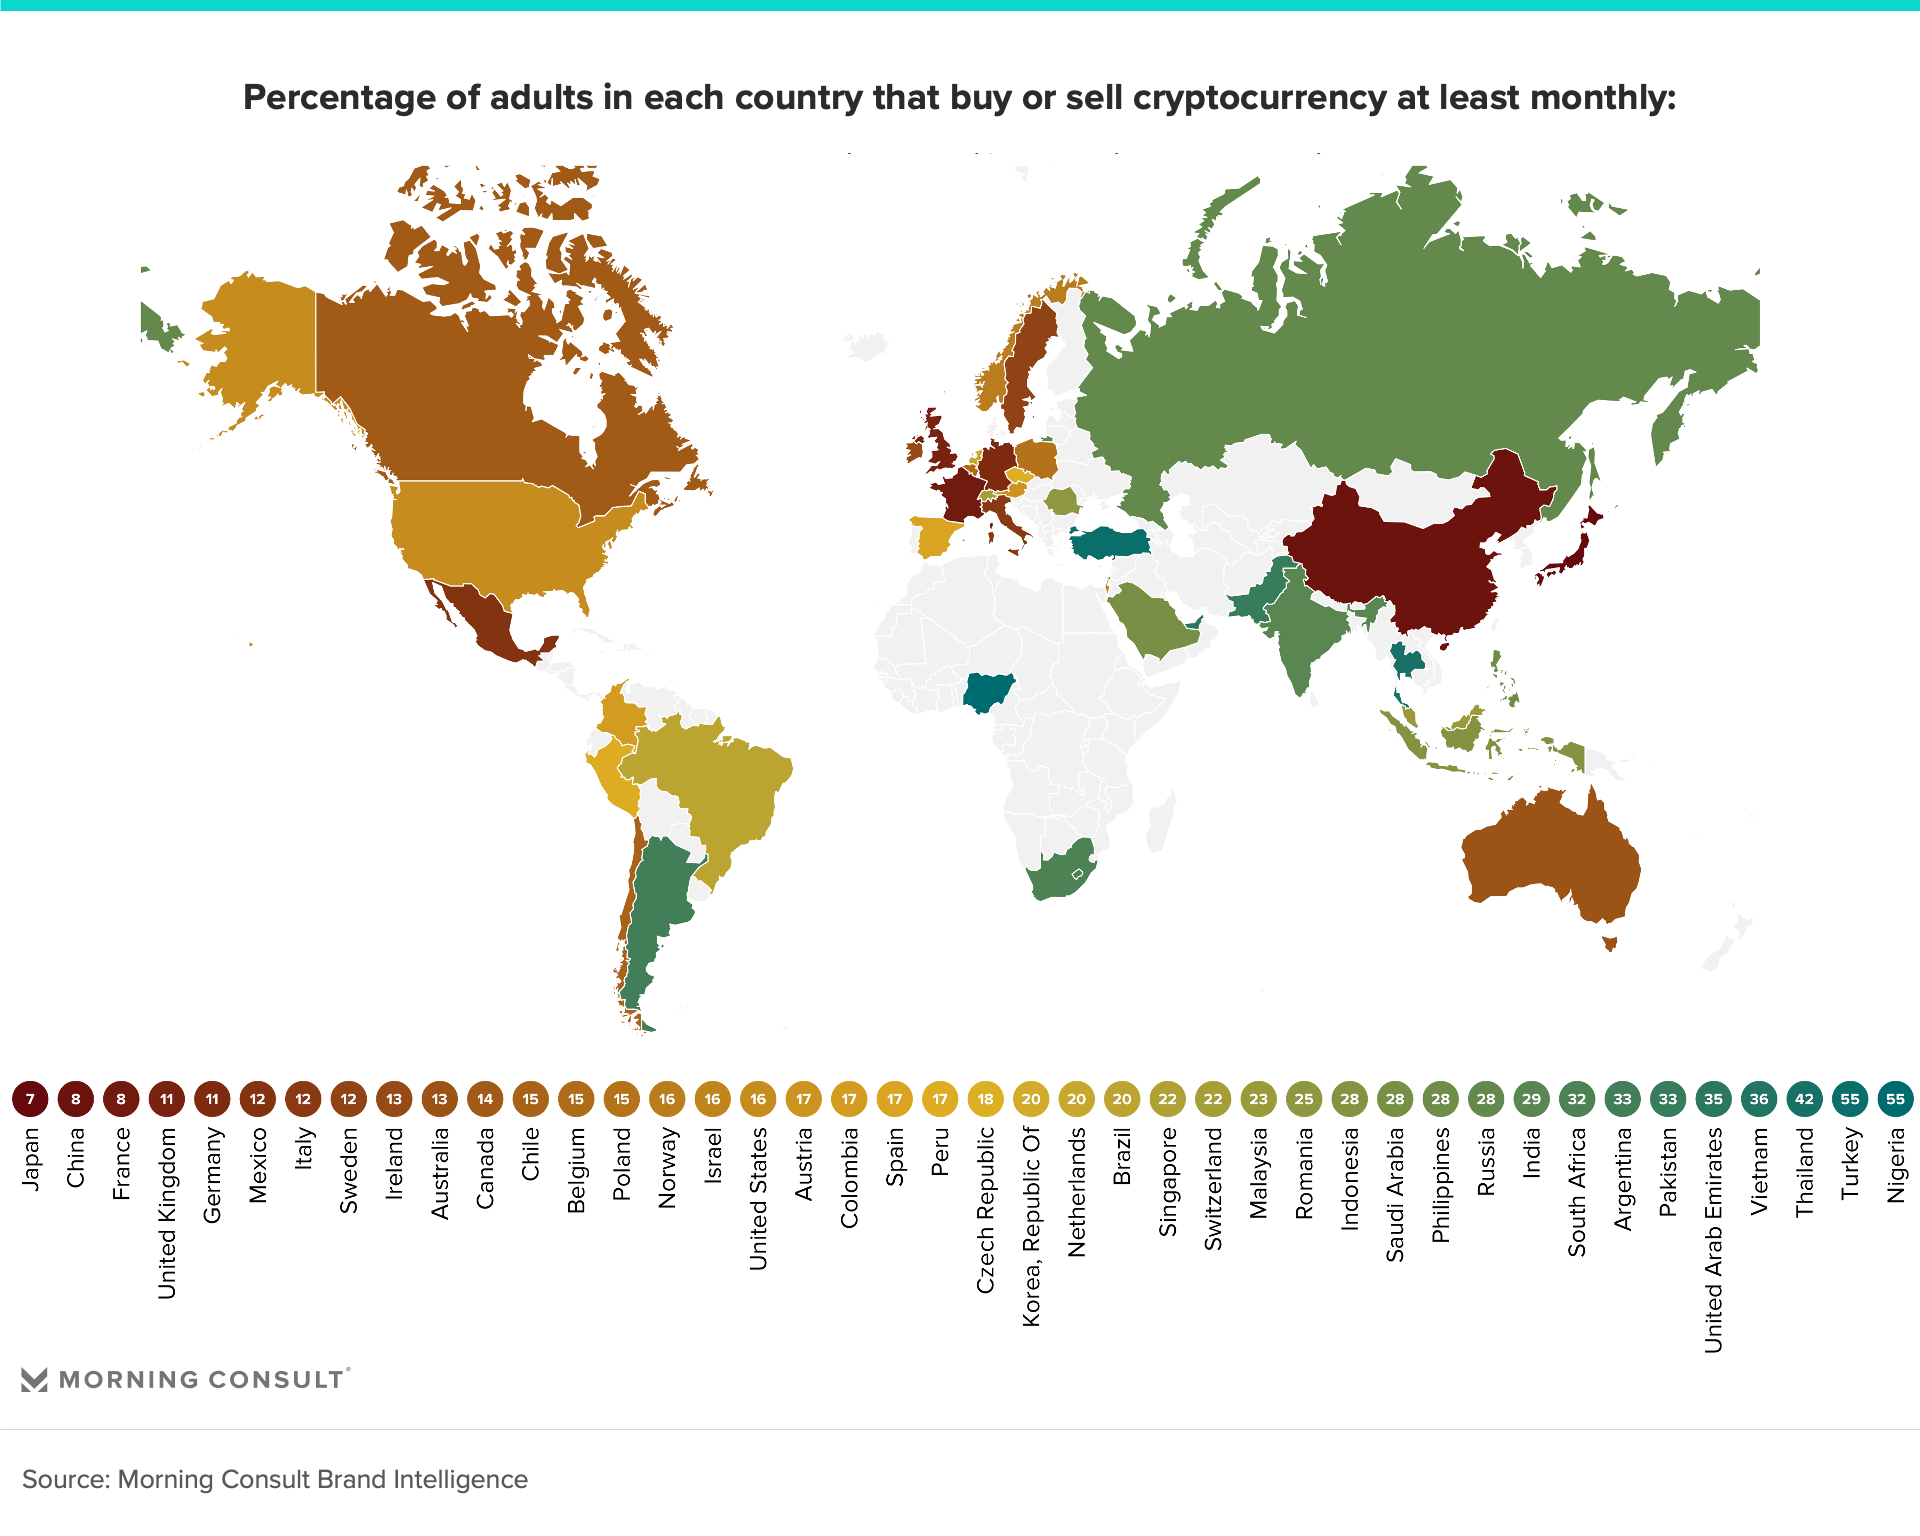 Map showing the percentage of adults in each country that buy or sell cryptocurrency at least monthly